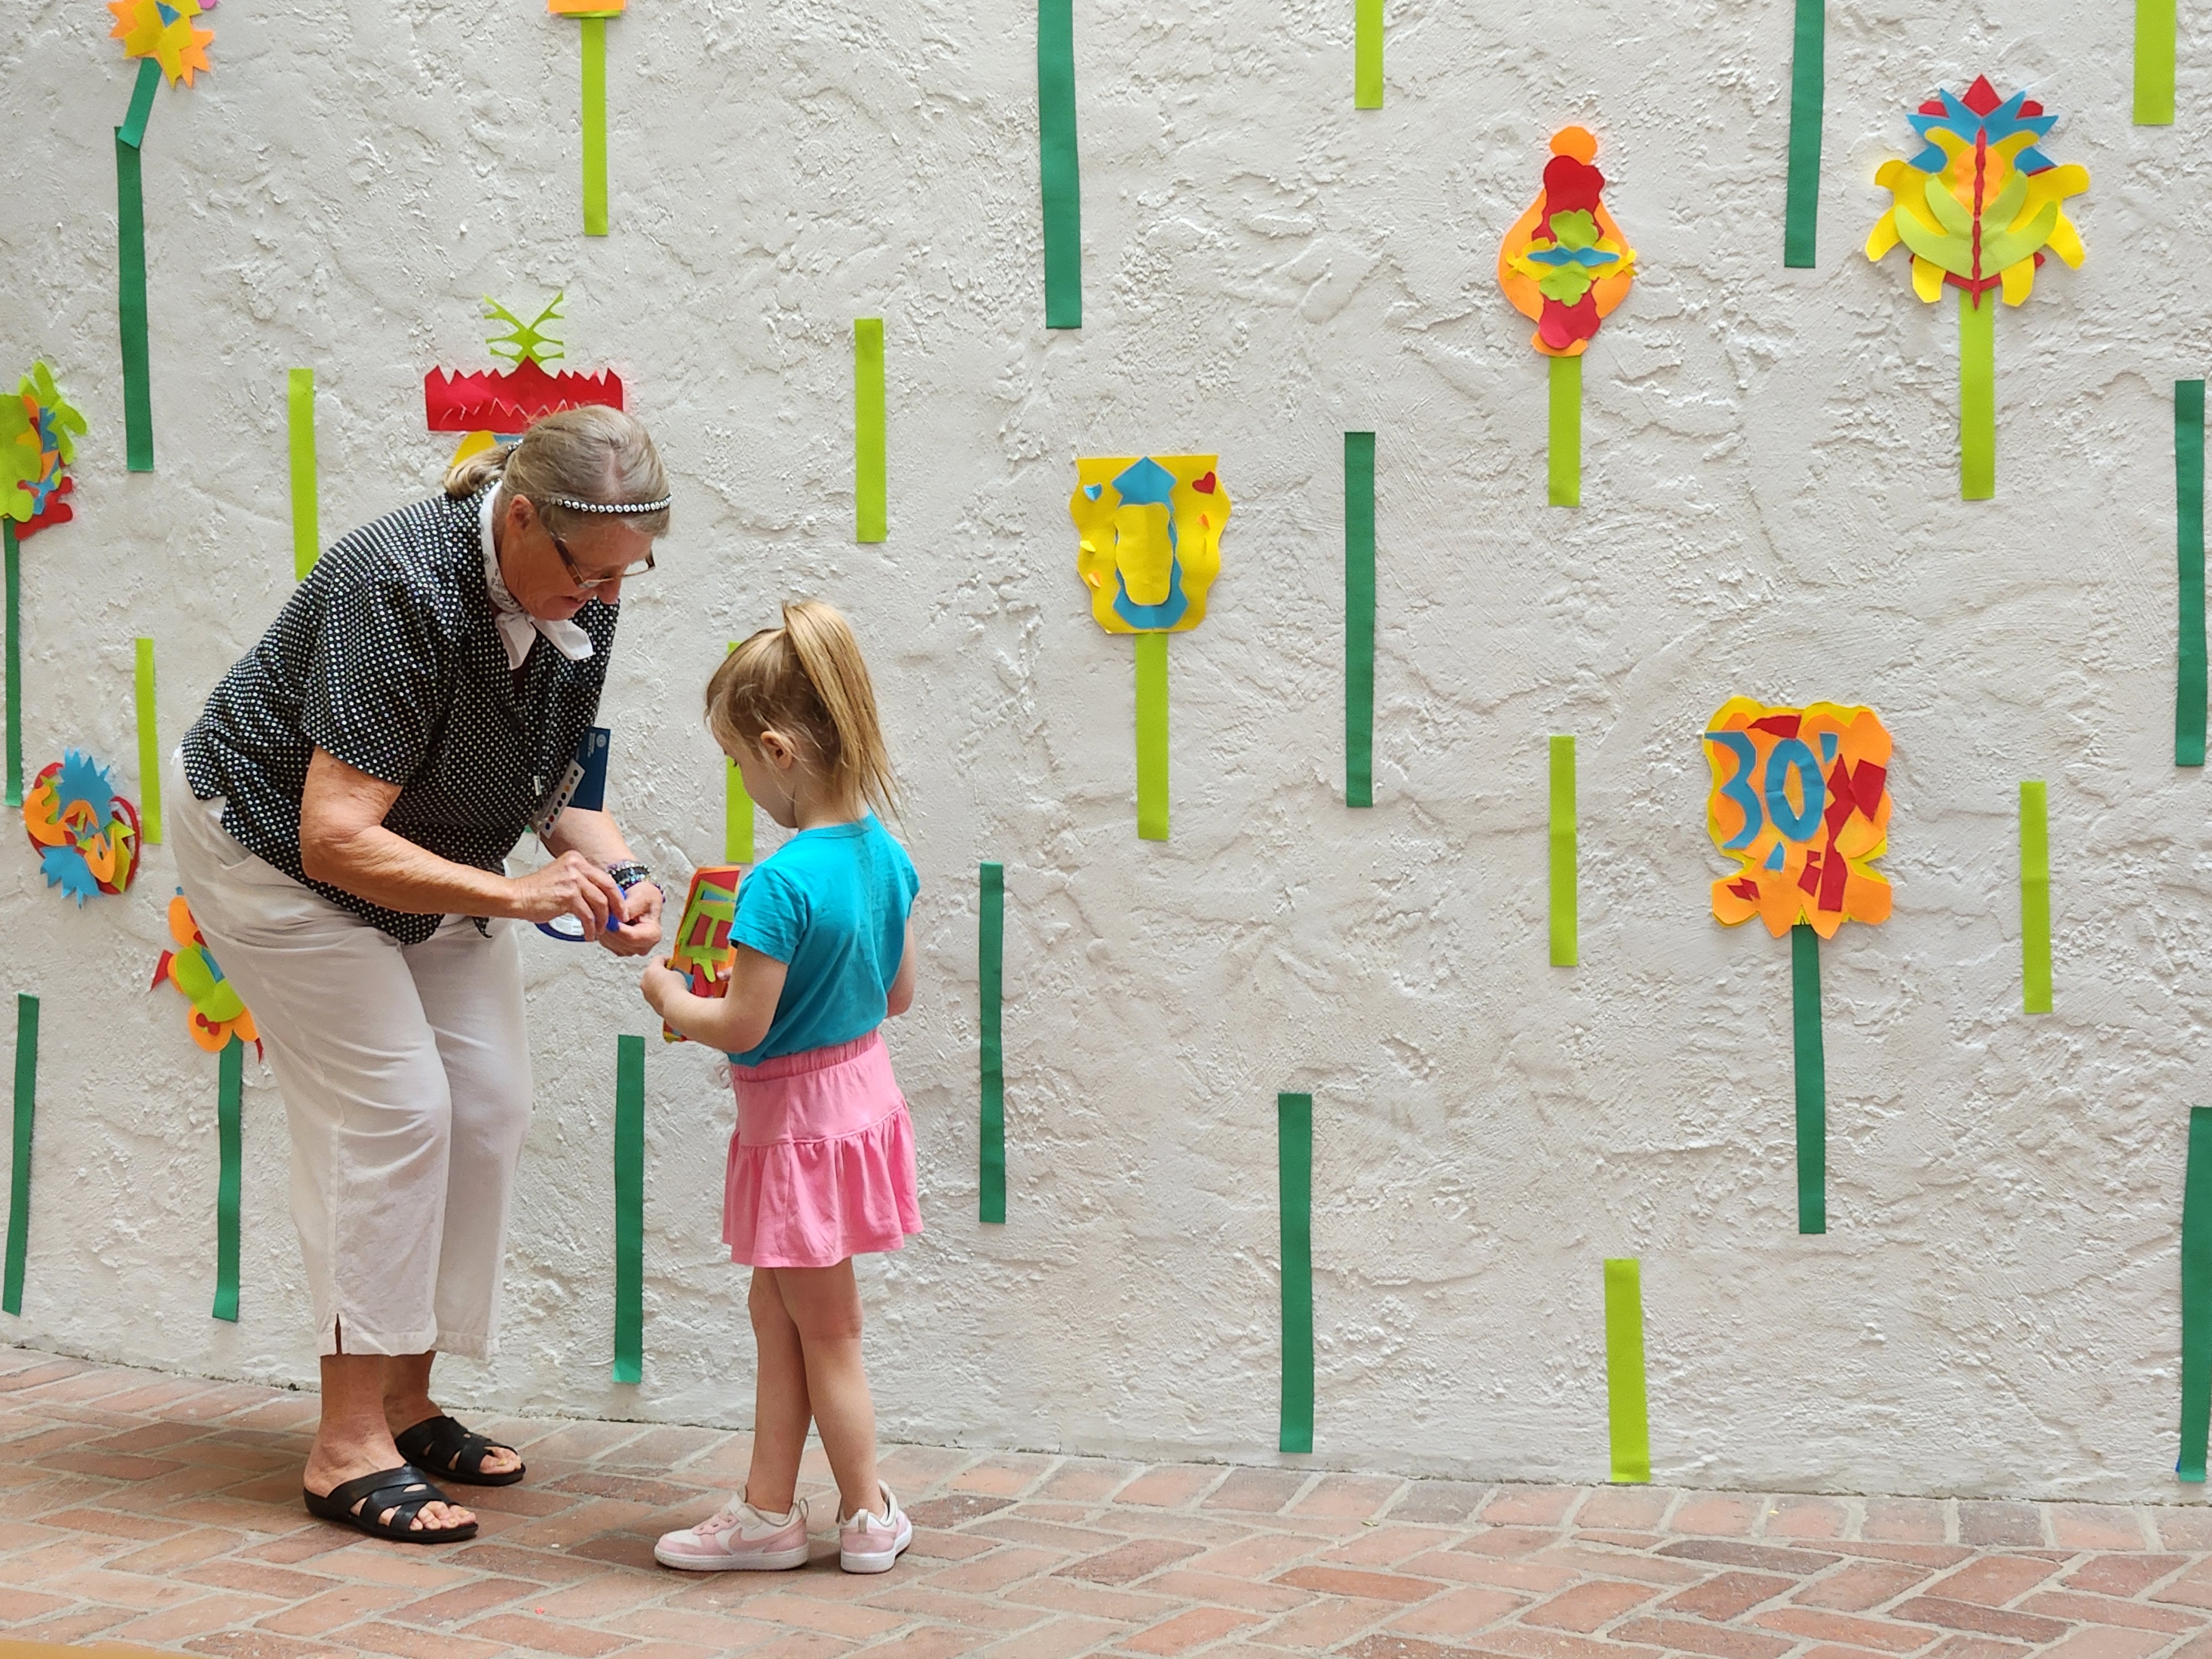 A woman and young girl stand against a colorful, crafted wall talking.